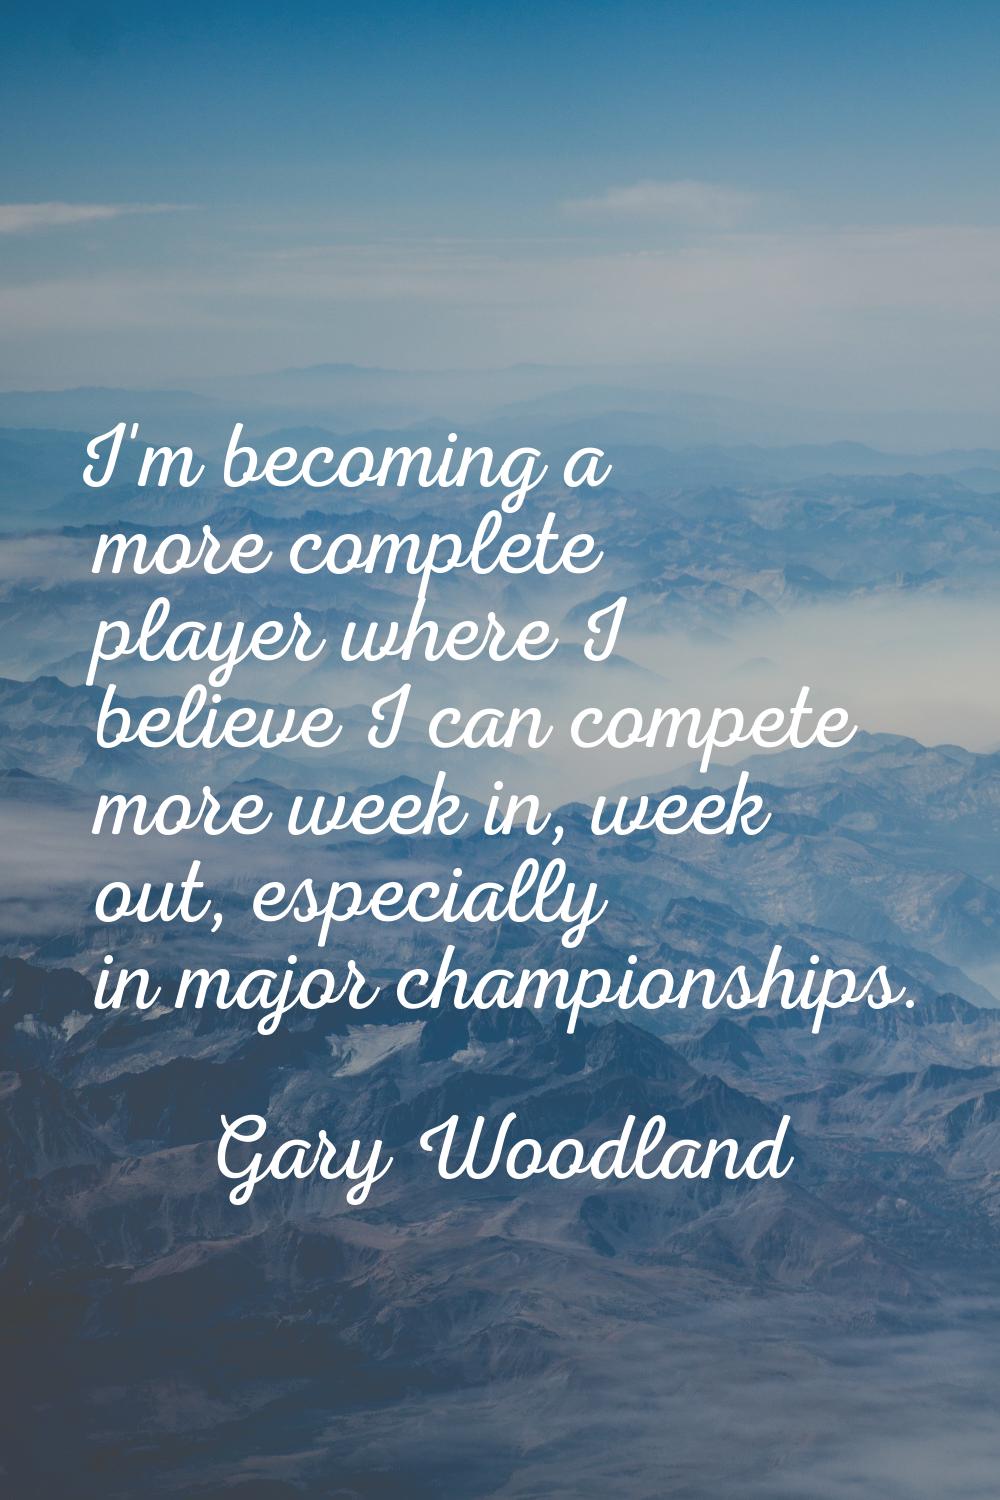 I'm becoming a more complete player where I believe I can compete more week in, week out, especiall